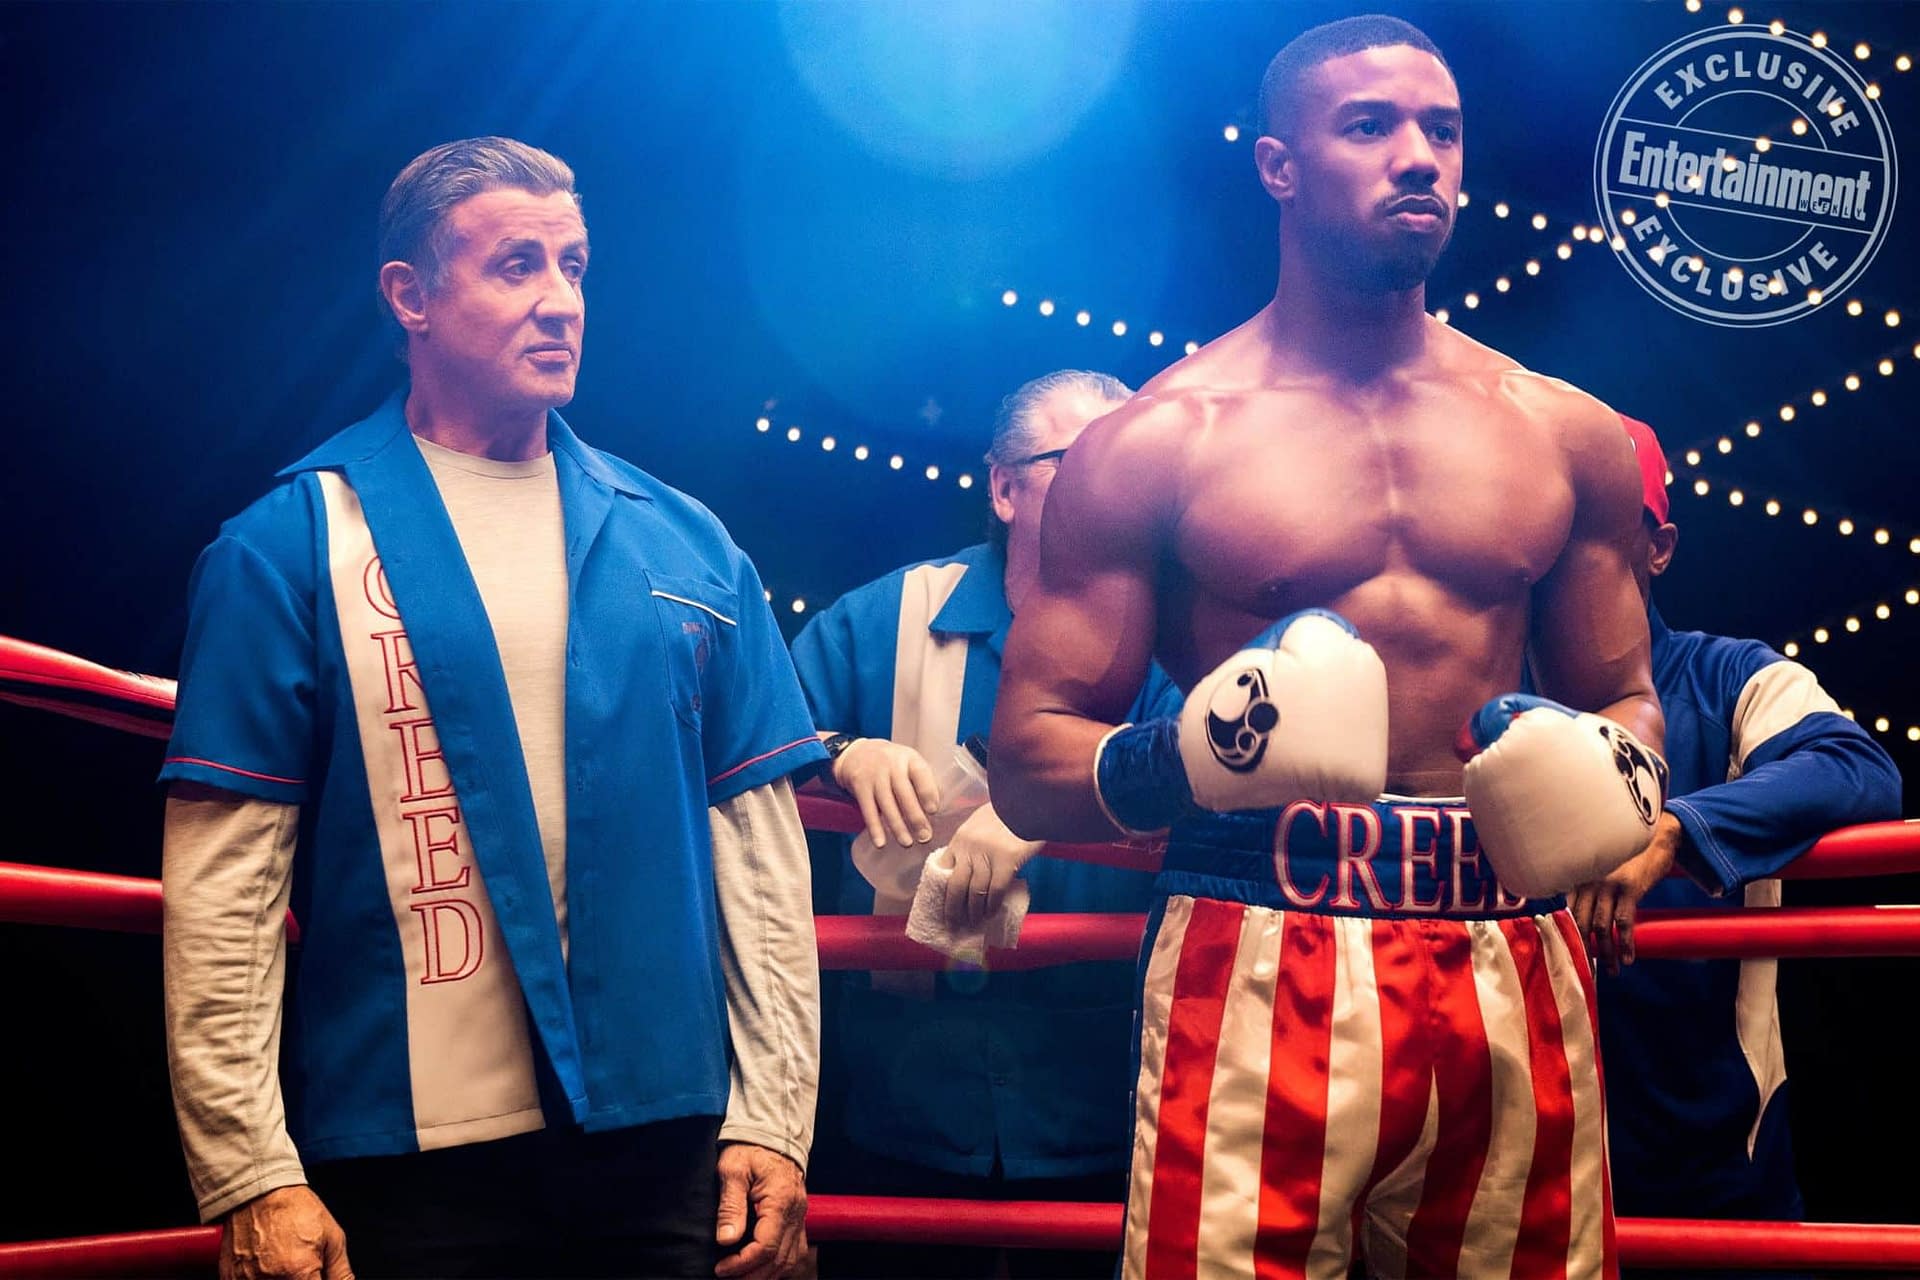 New Image from Creed II with Adonis Ready for a Fight